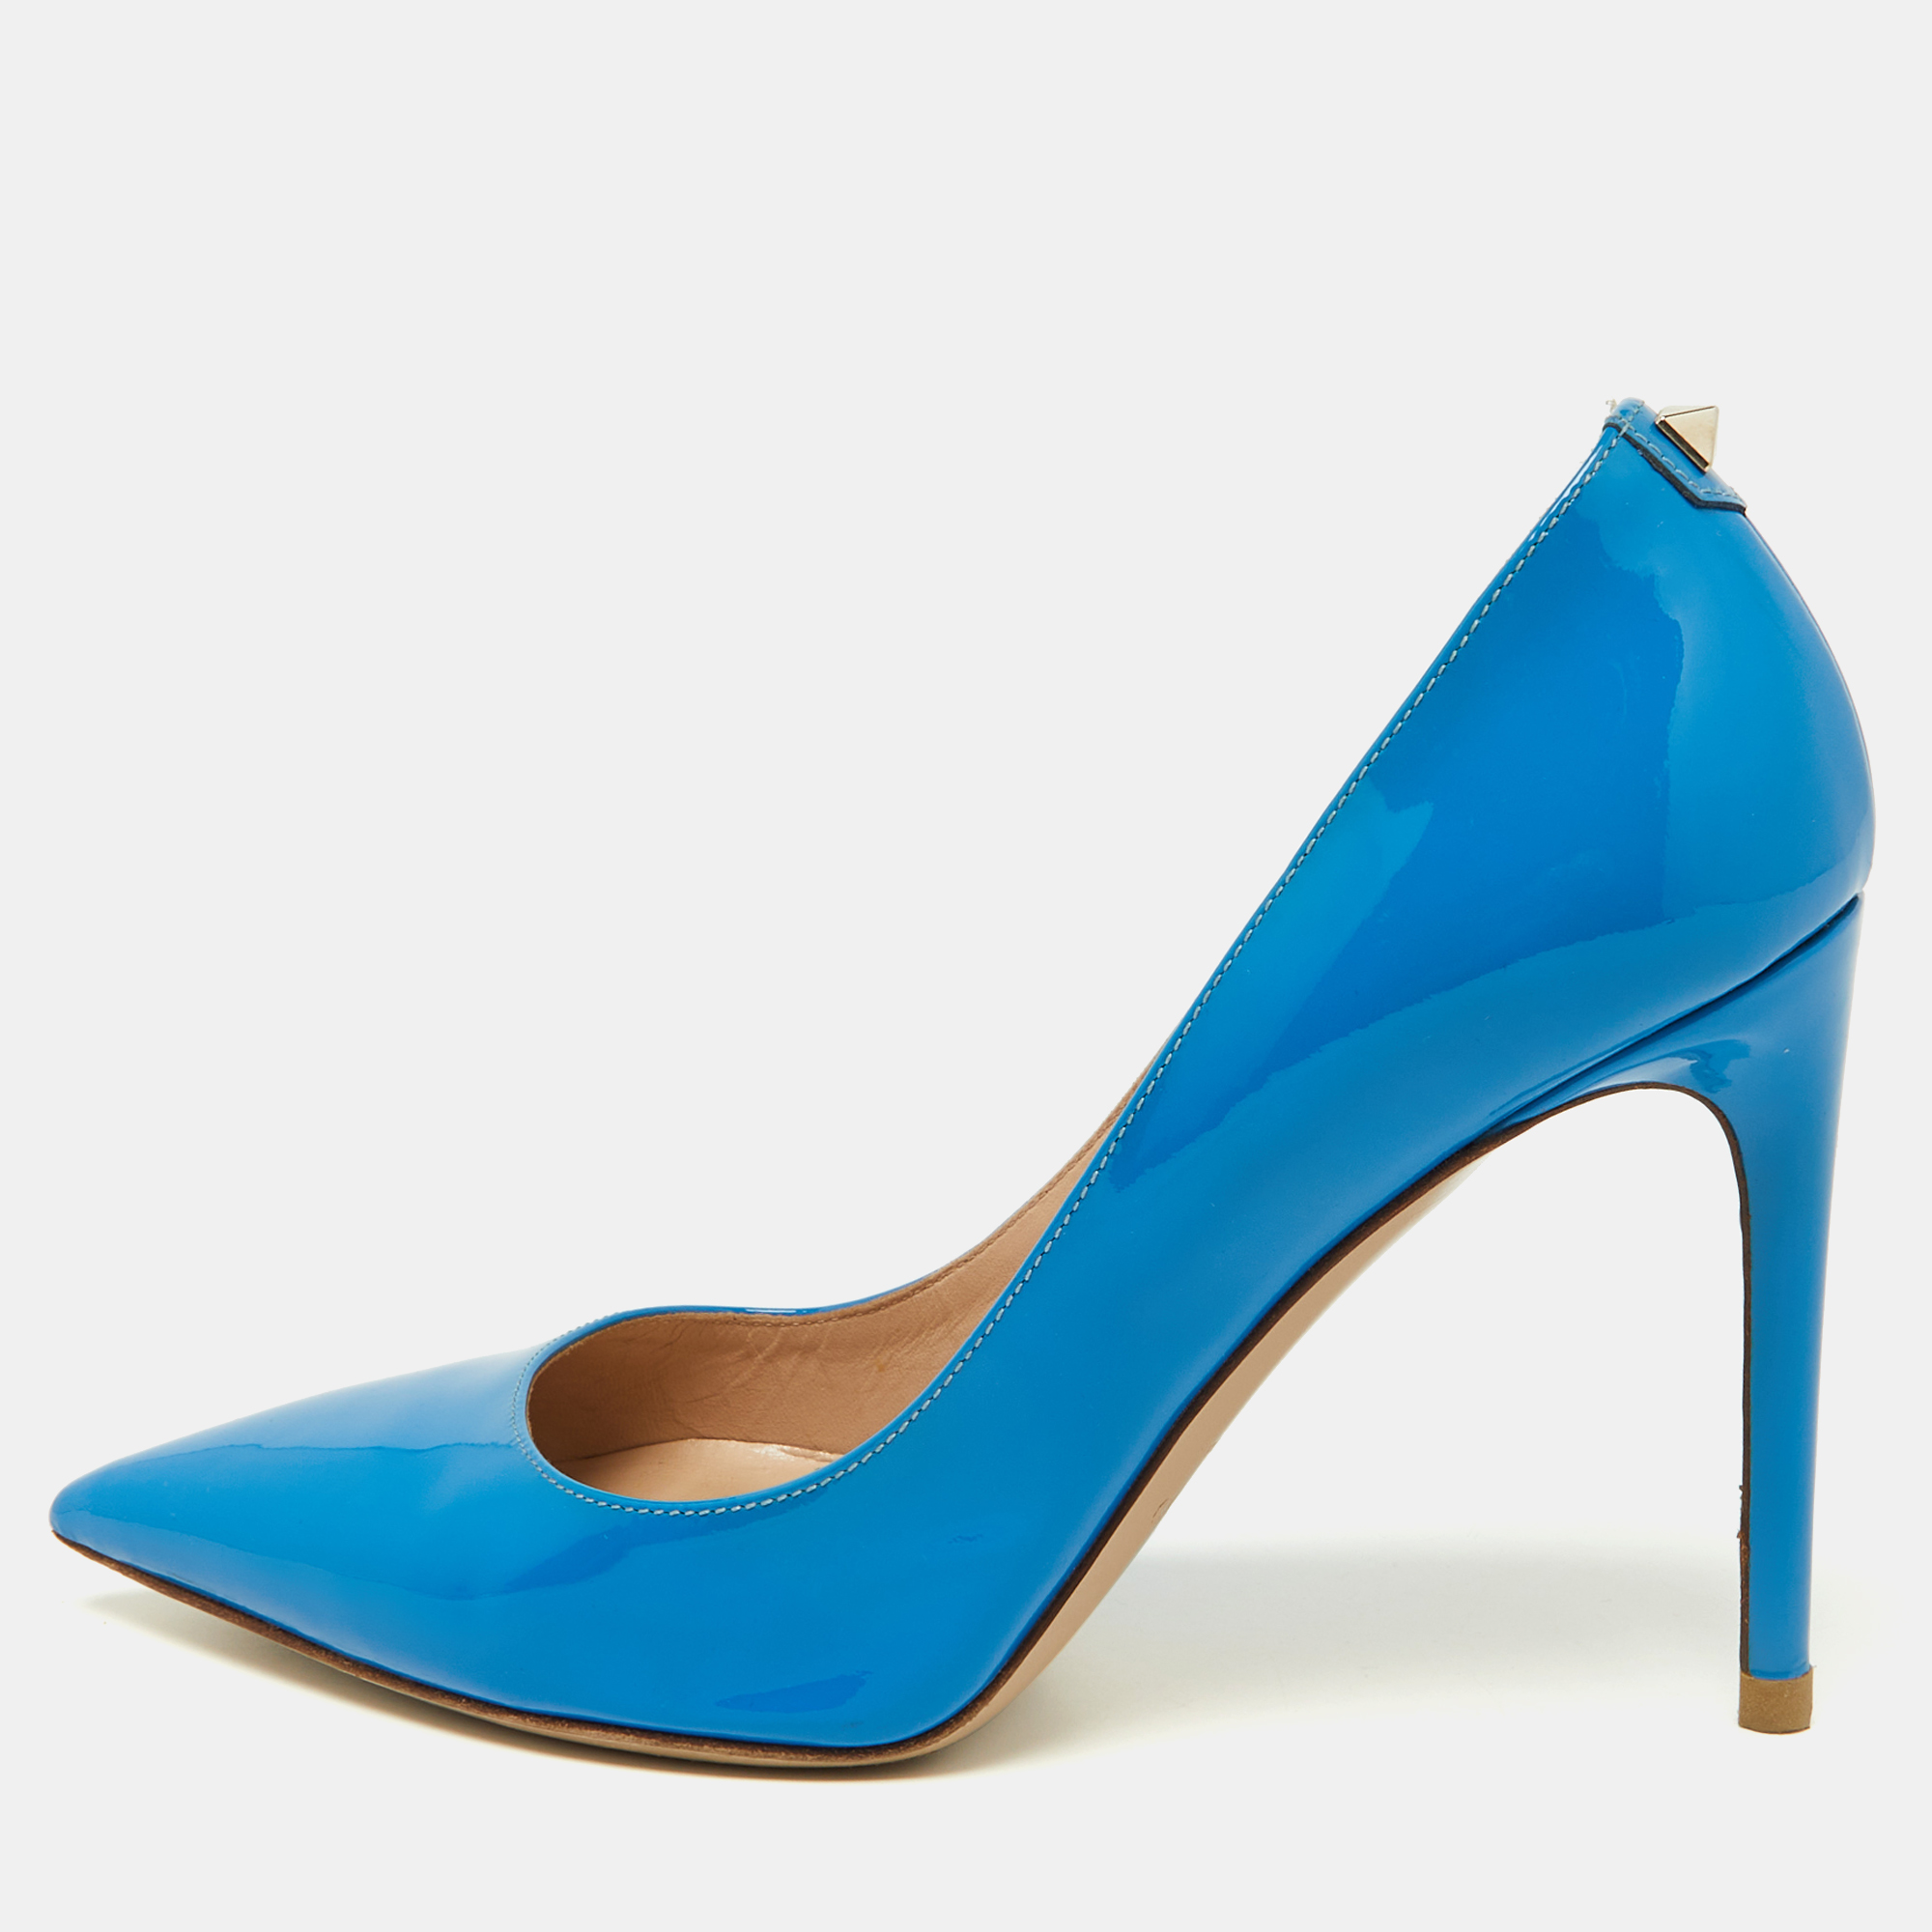 Valentino blue patent leather pointed toe pumps size 36